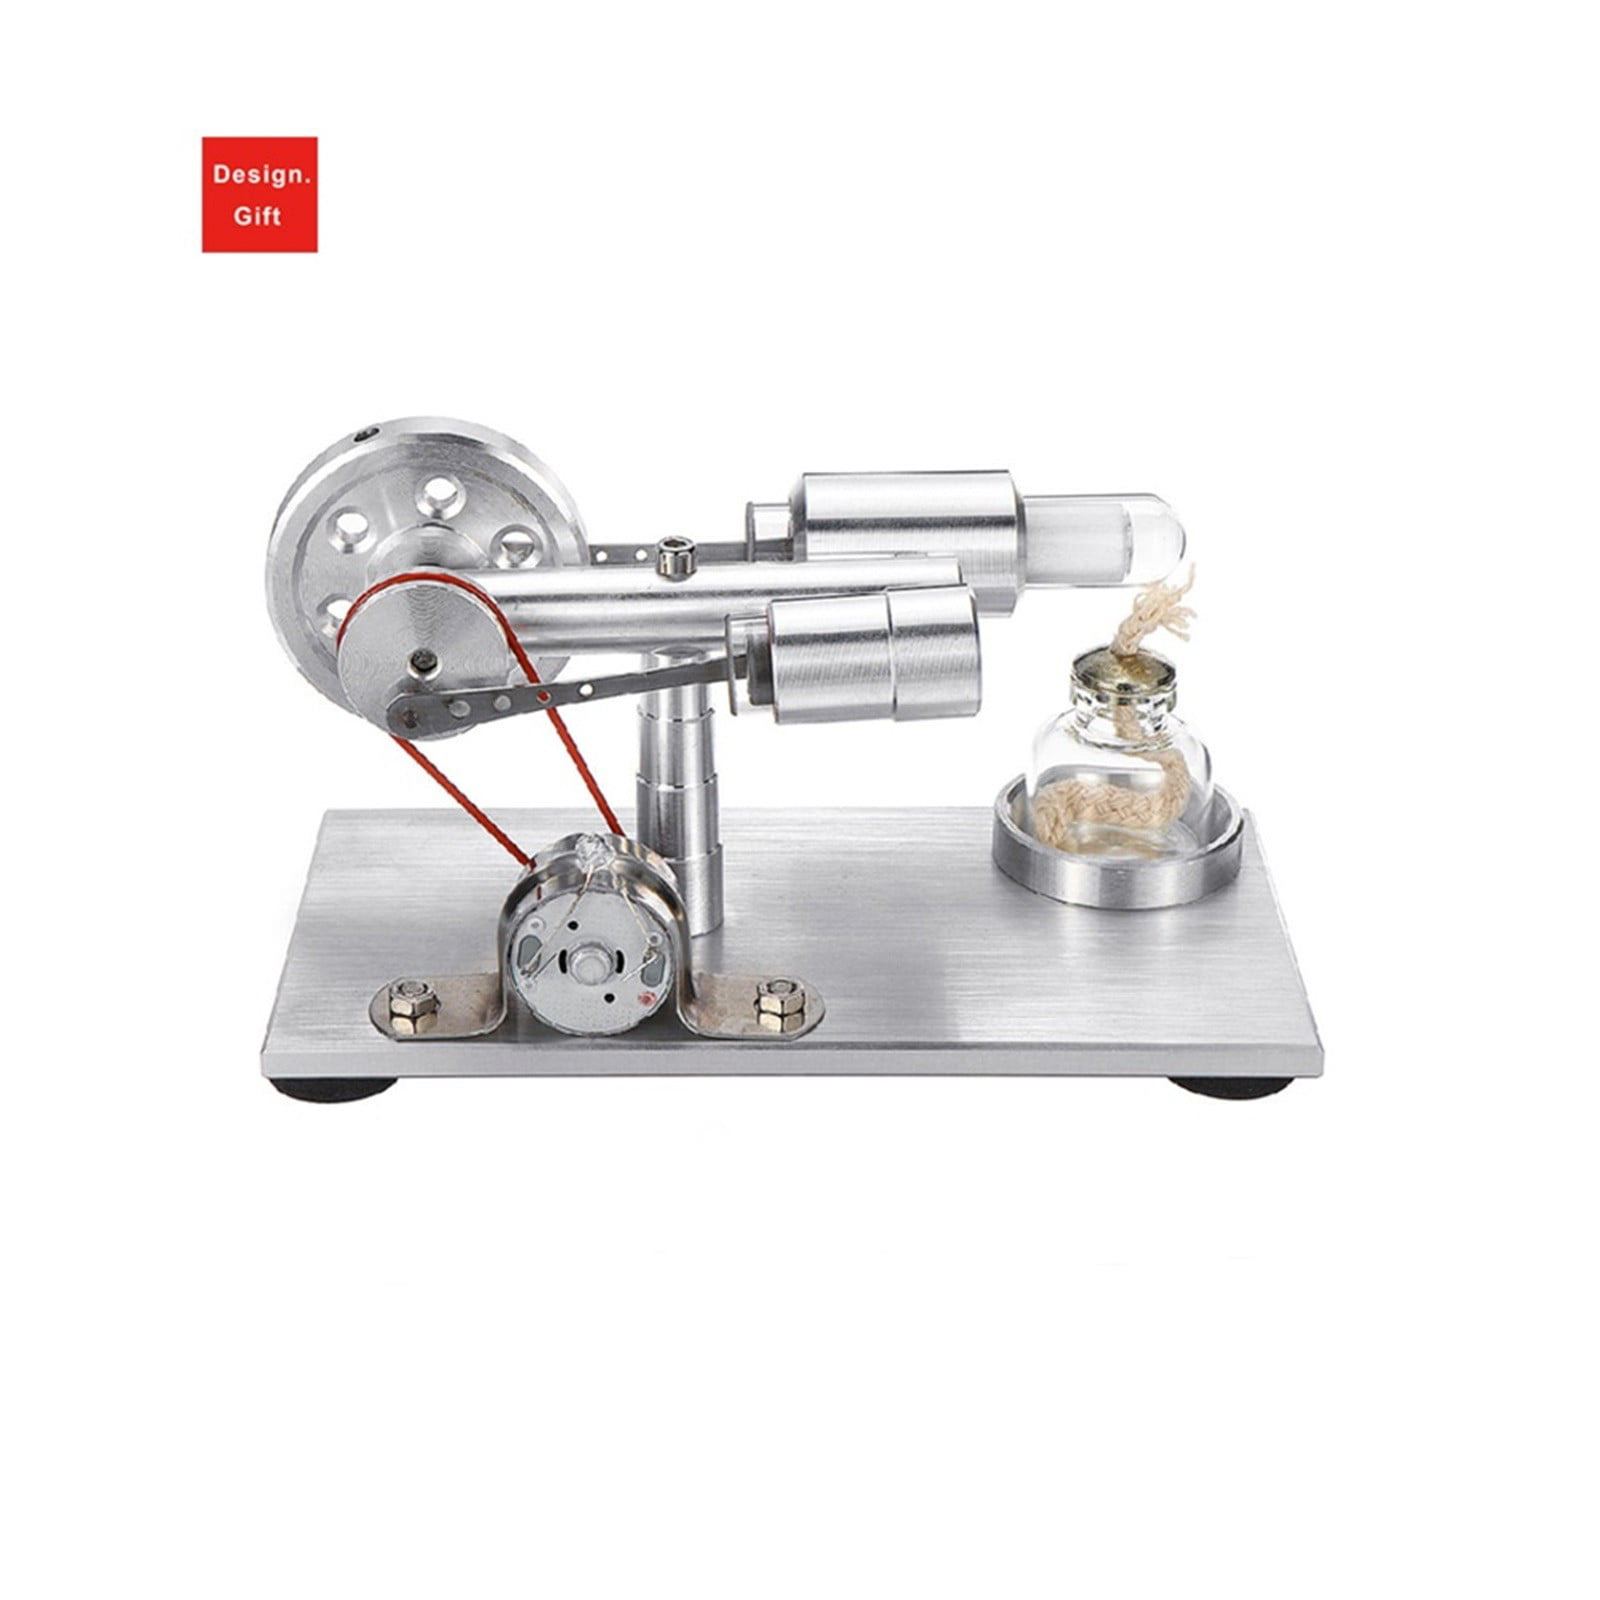 Mini Hot Air Stirling Engine Motor Model Educational Toy Kits Goods Gadget